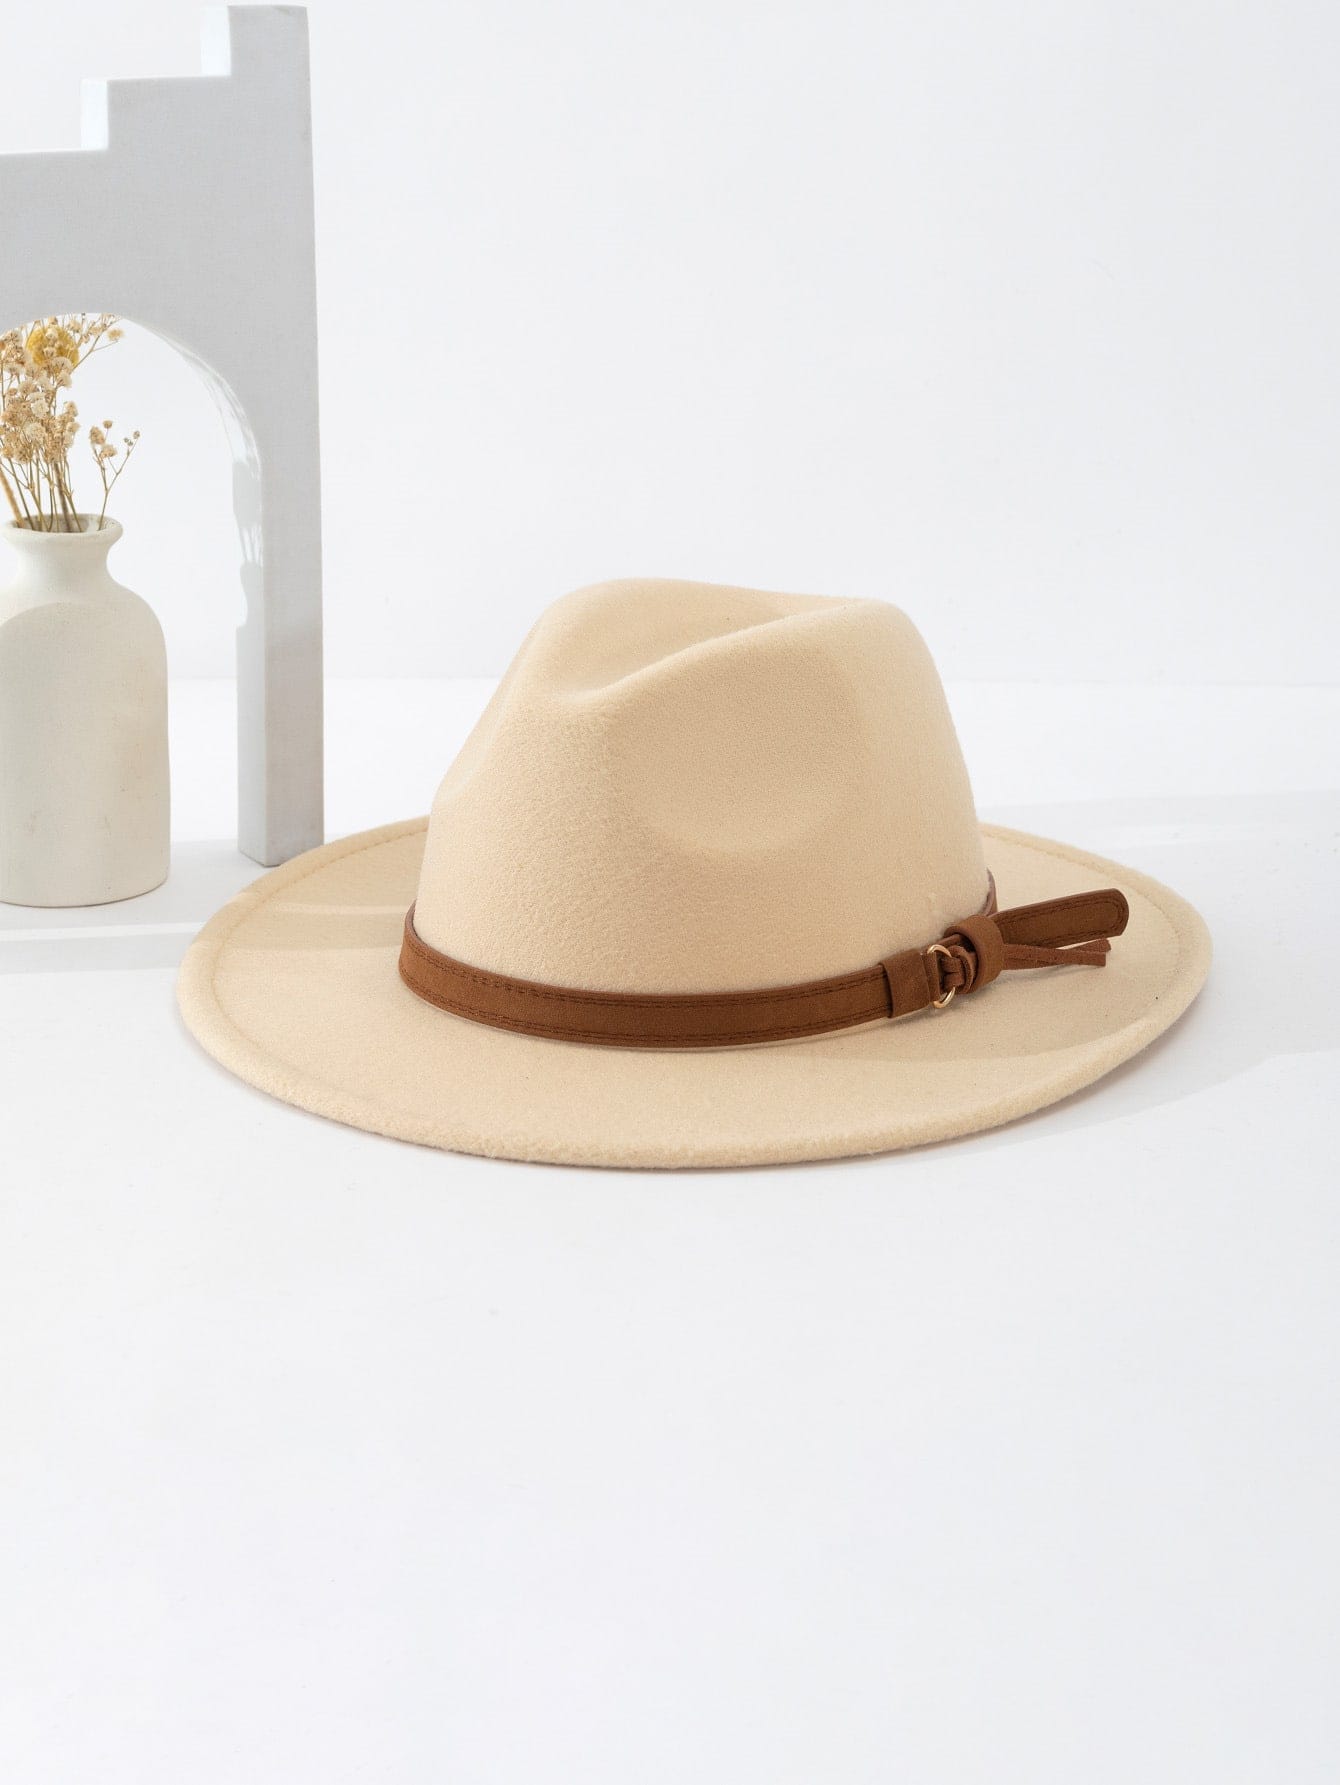 It’s a Beautiful Day Beige Small Belt Decorated Dress Hat